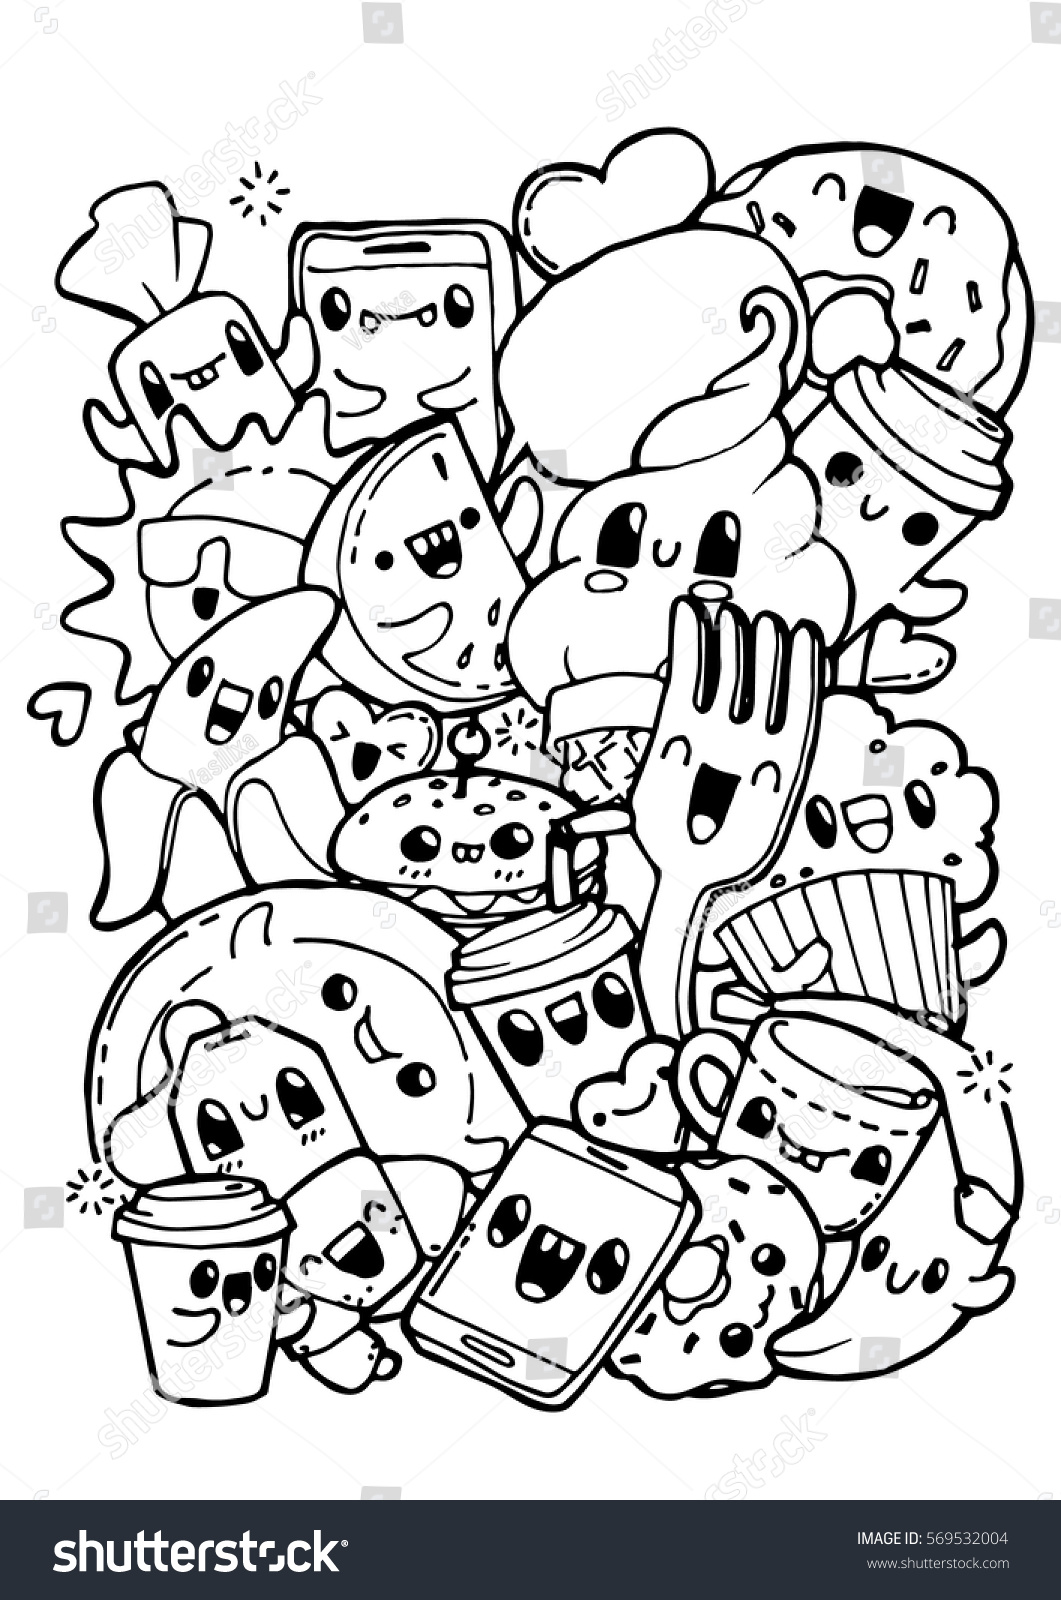 Dining doodles Breakfast lunch dinner food Coloring pages for kids